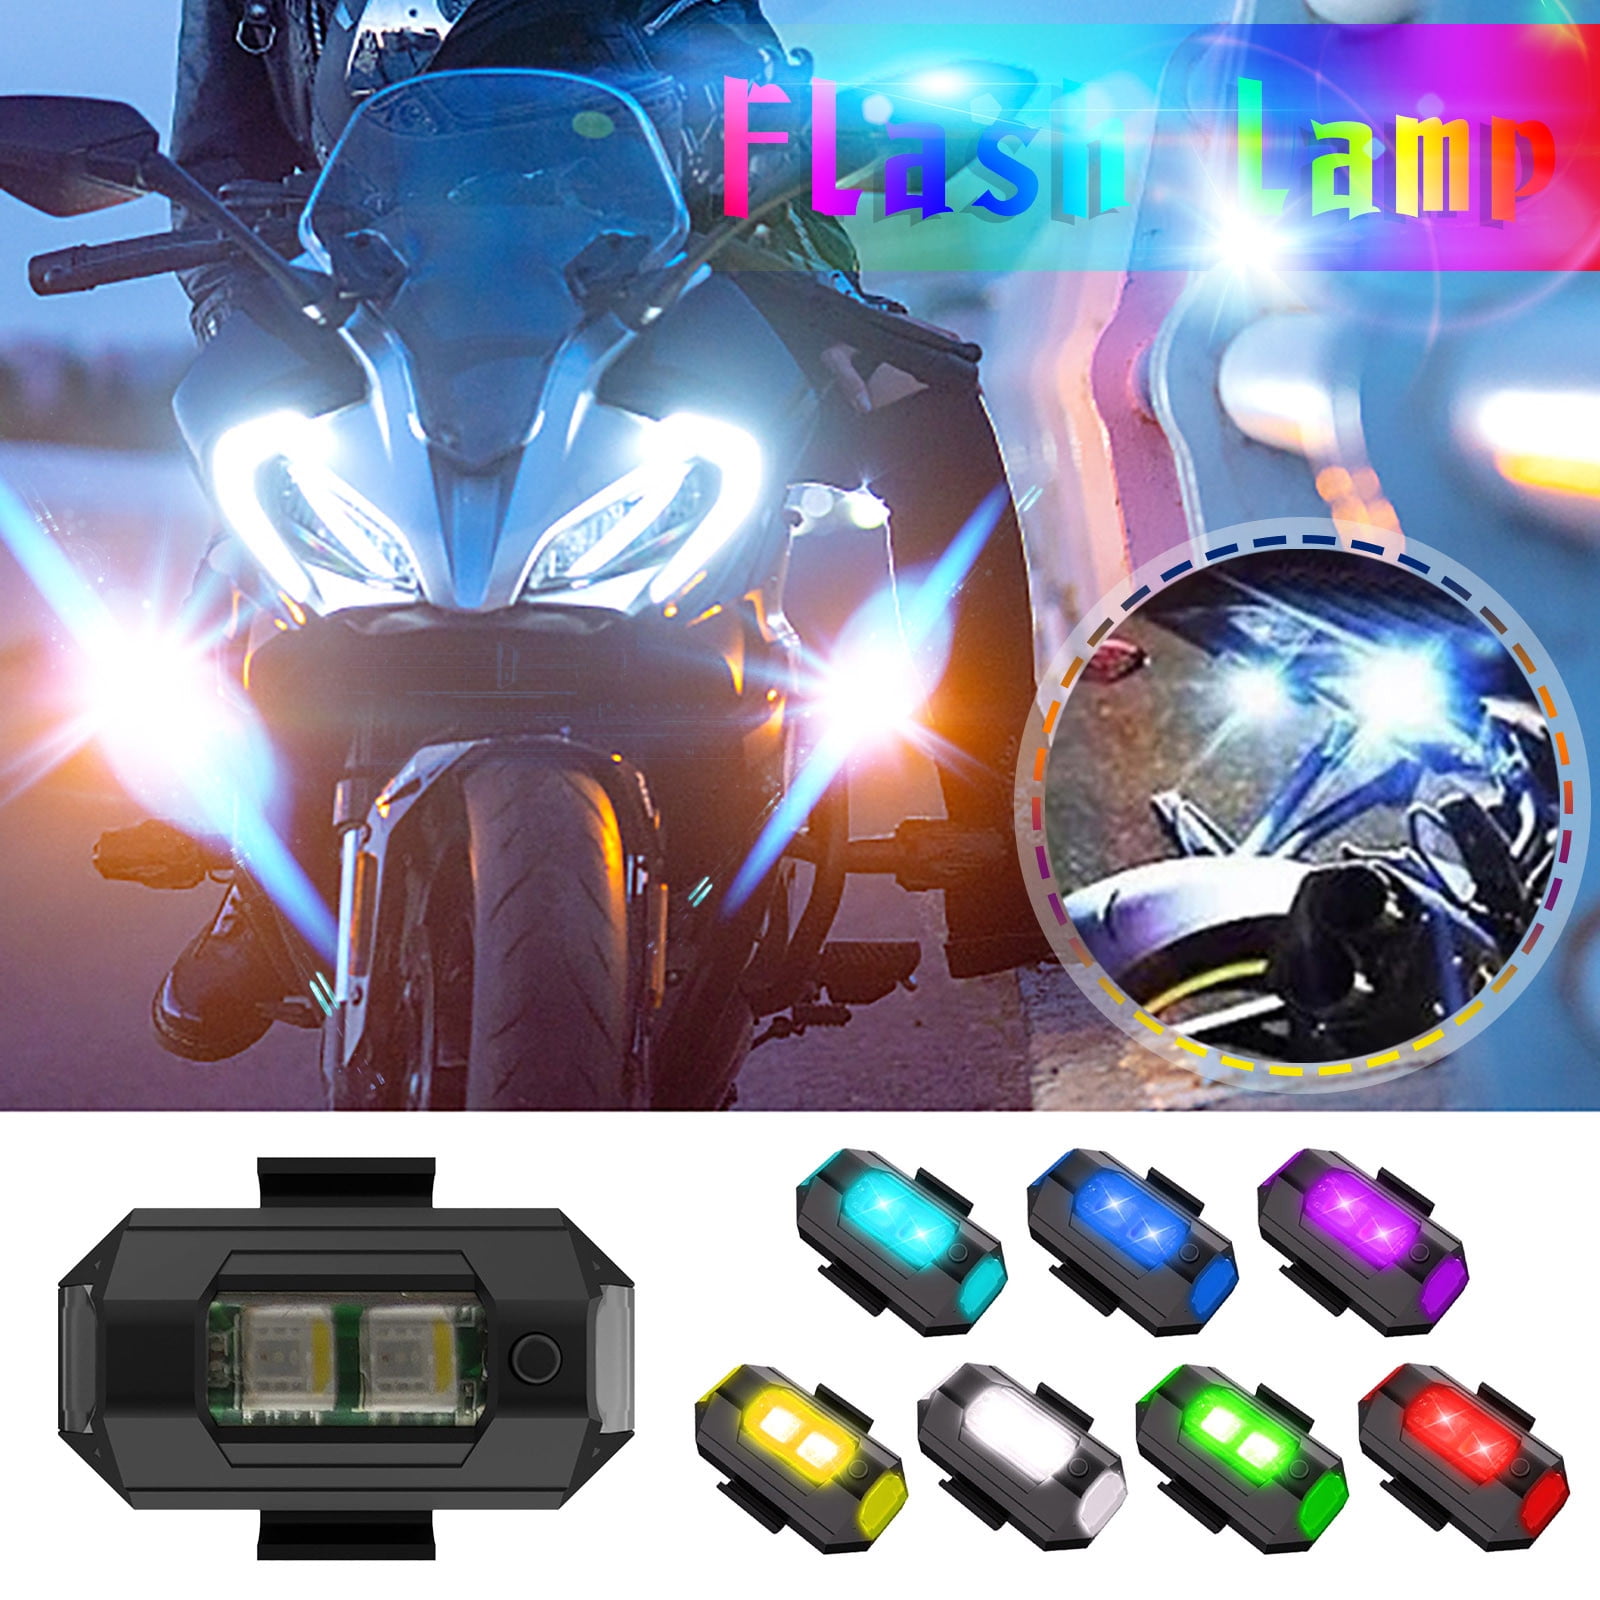 White Yolu 2Pcs Universal Motorcycle LED Work Light Bar Lamp Super Bright Waterproof Strobe Driving Light Fog Light Red and Colorful Four Colors Blue 1Pcs ON/Off Button Switch 